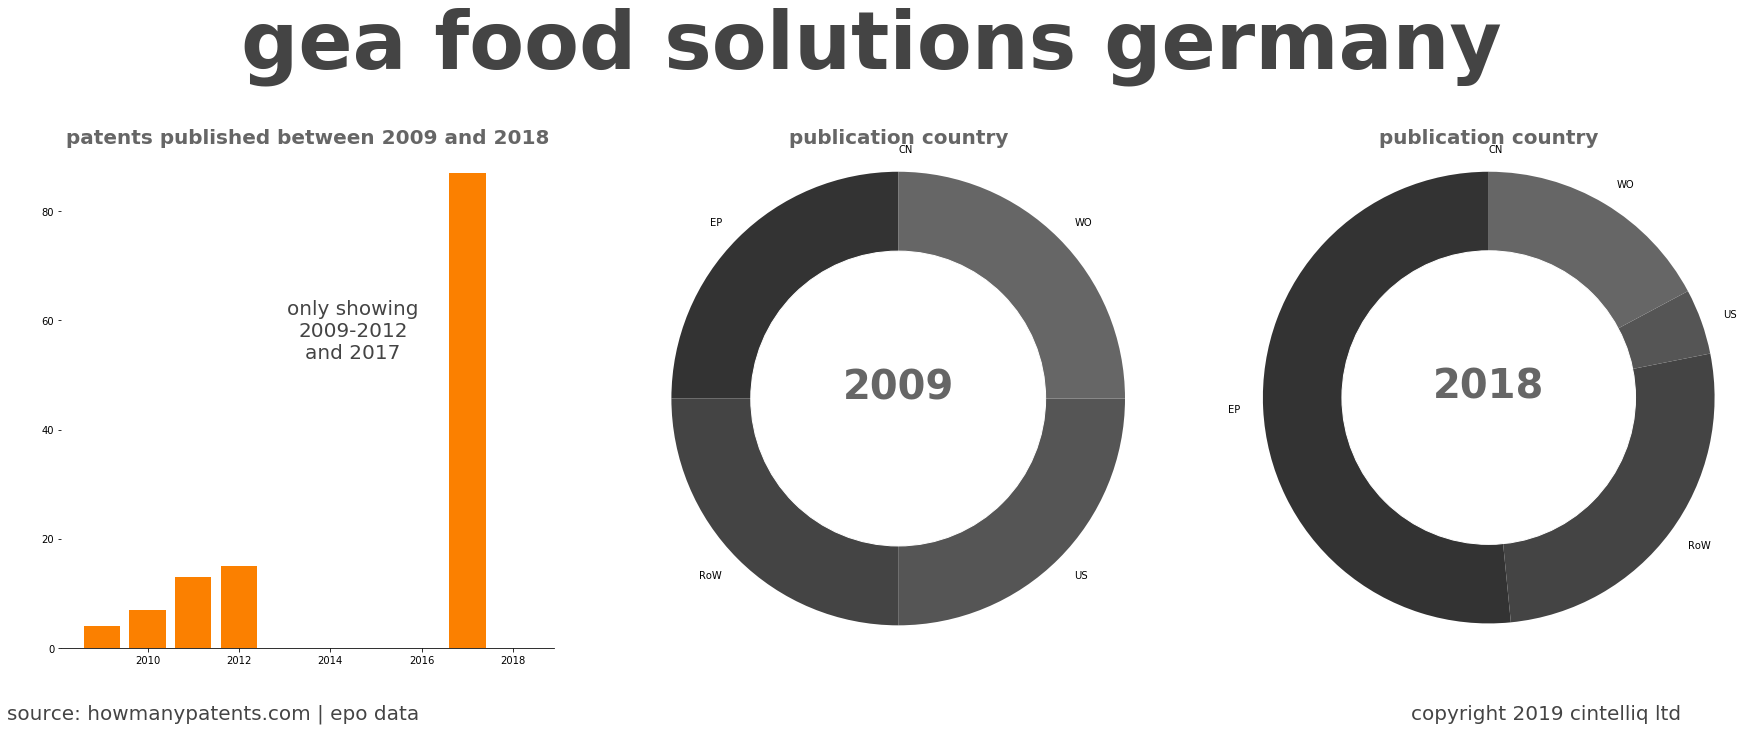 summary of patents for Gea Food Solutions Germany